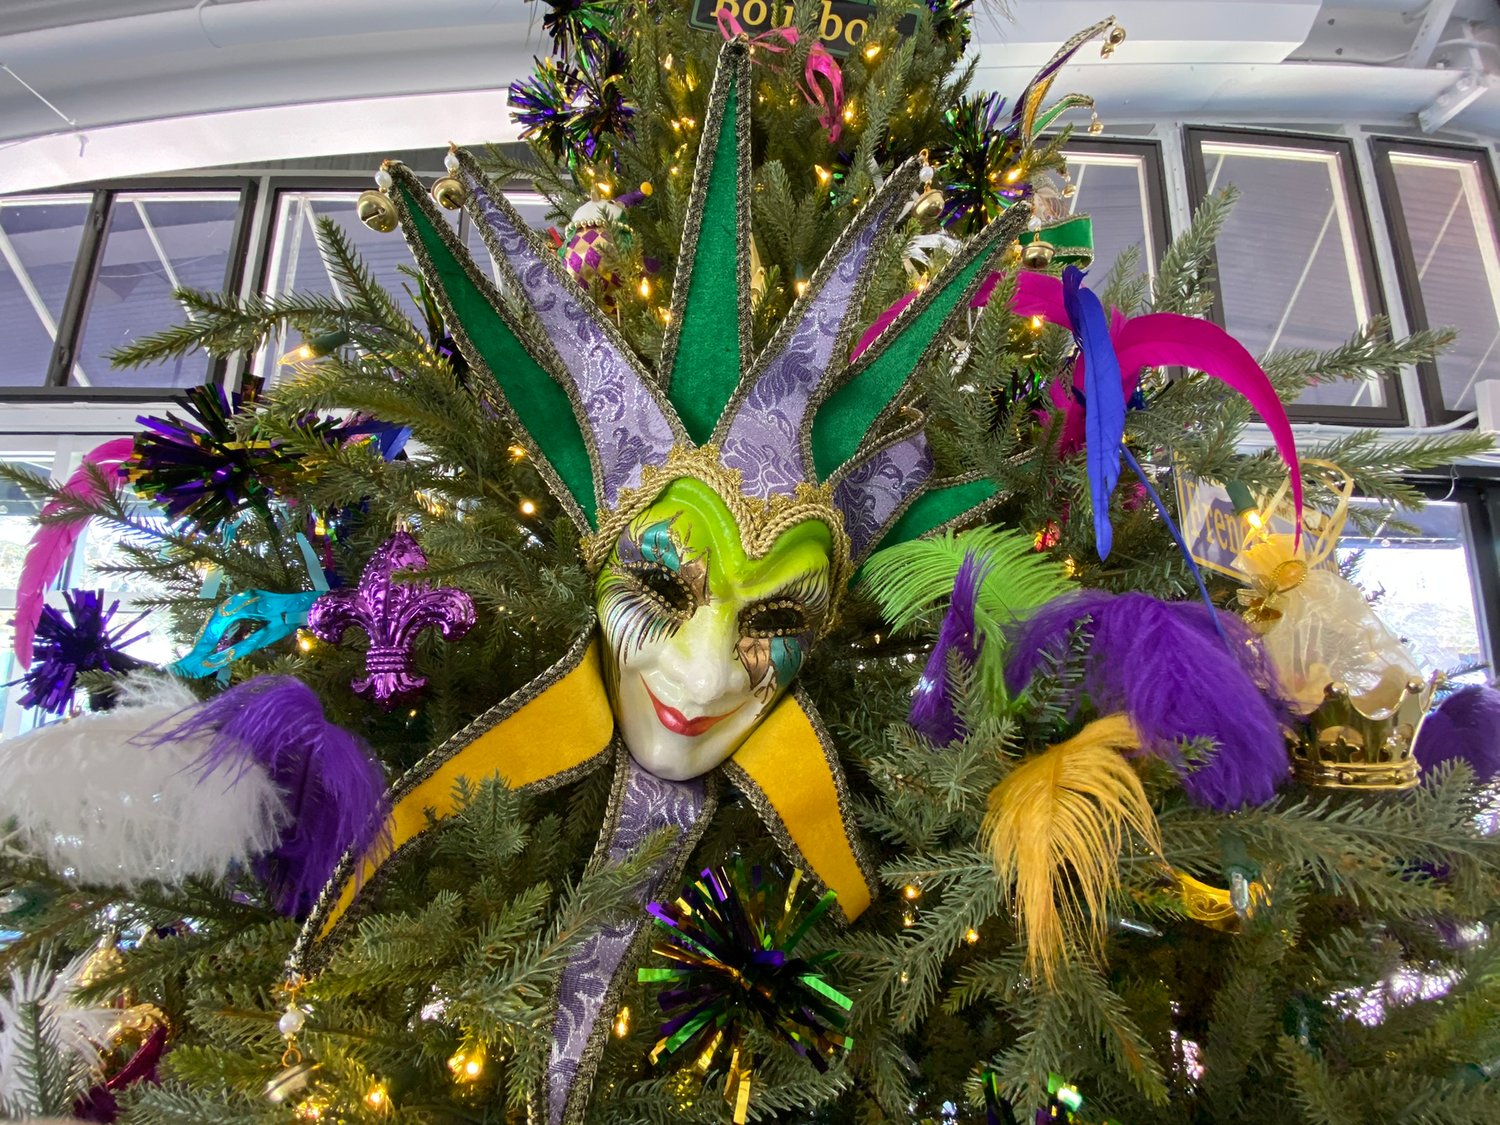 The massive tree inside The Mill, in Fairhope, is covered in Mardi Gras themed decorations including New Orleans street signs.